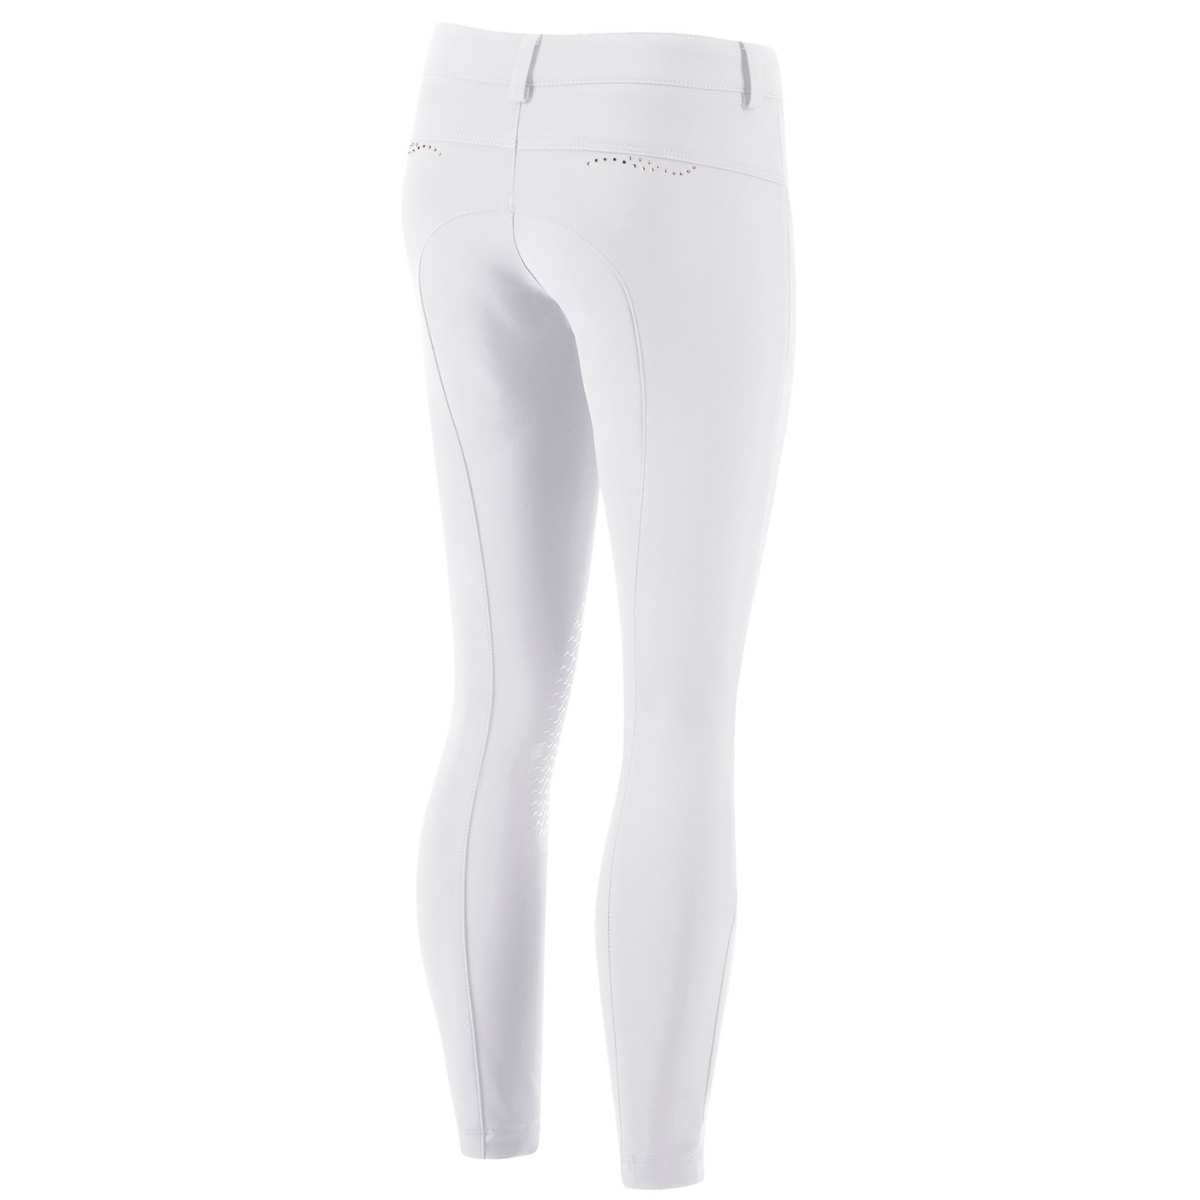 Animo 'Noogle' Knee Grip Breeches in Bianco